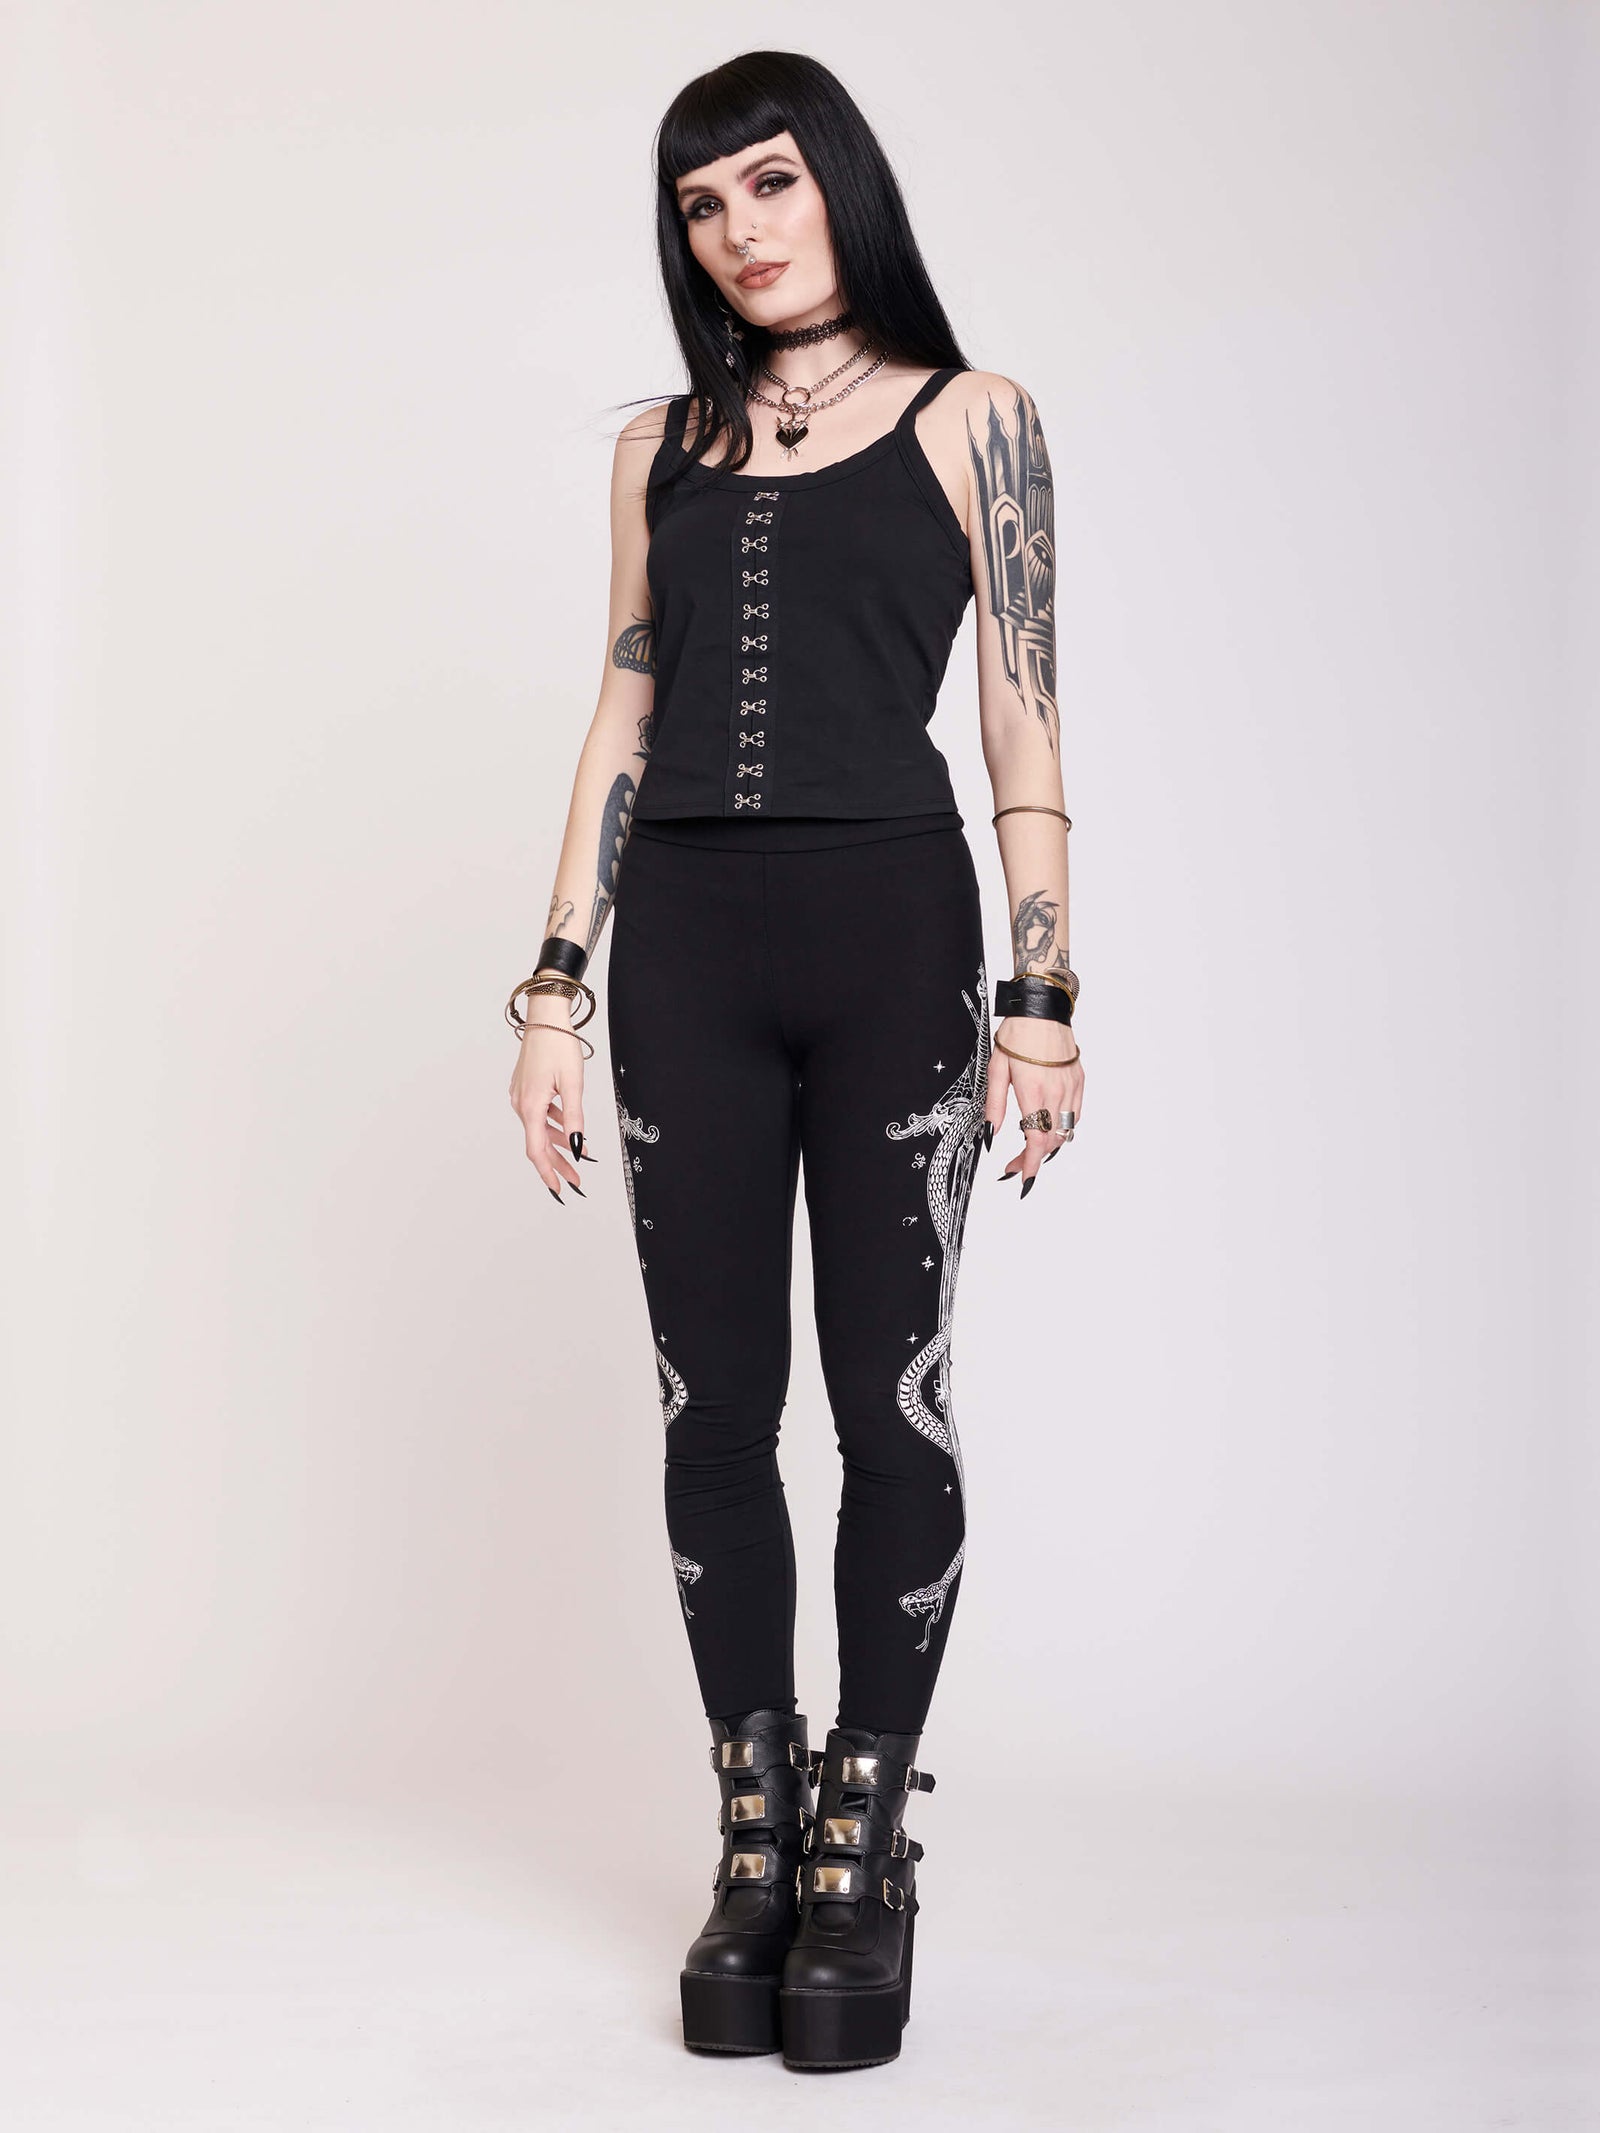 Gothic Women's Lace Leggings With Criss-cross Straps